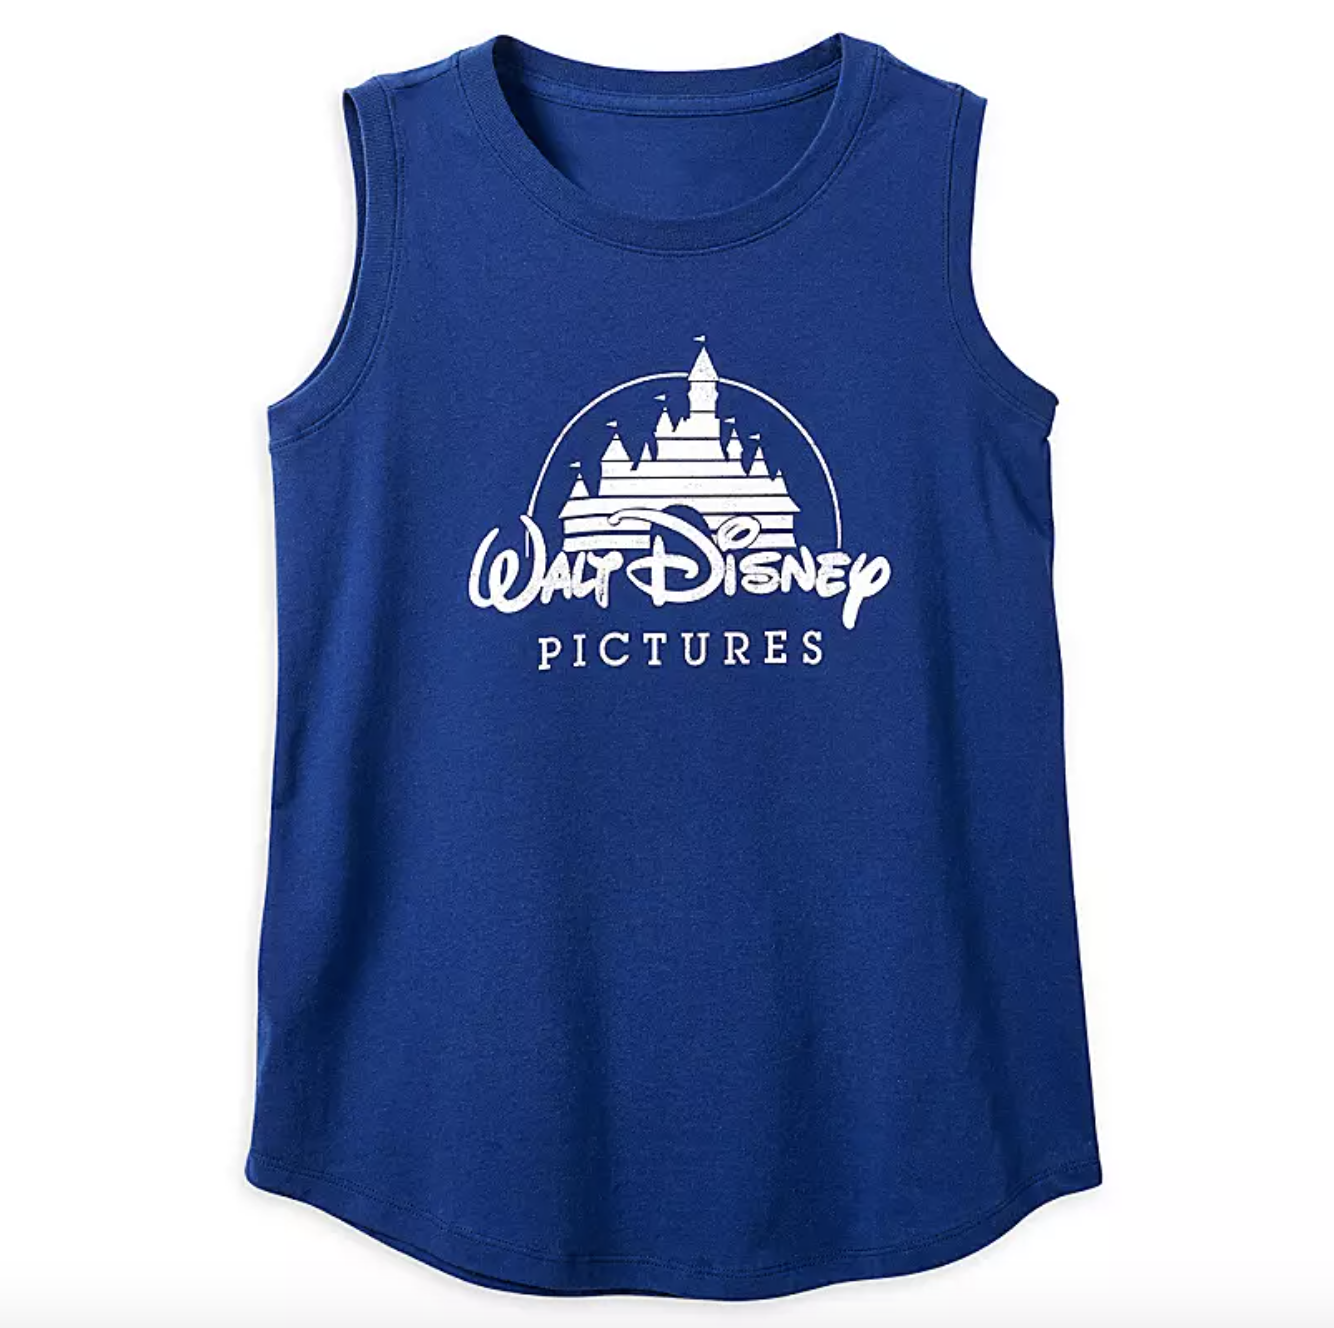 a darker blue tank top with the walt disney pictures logo on it in white